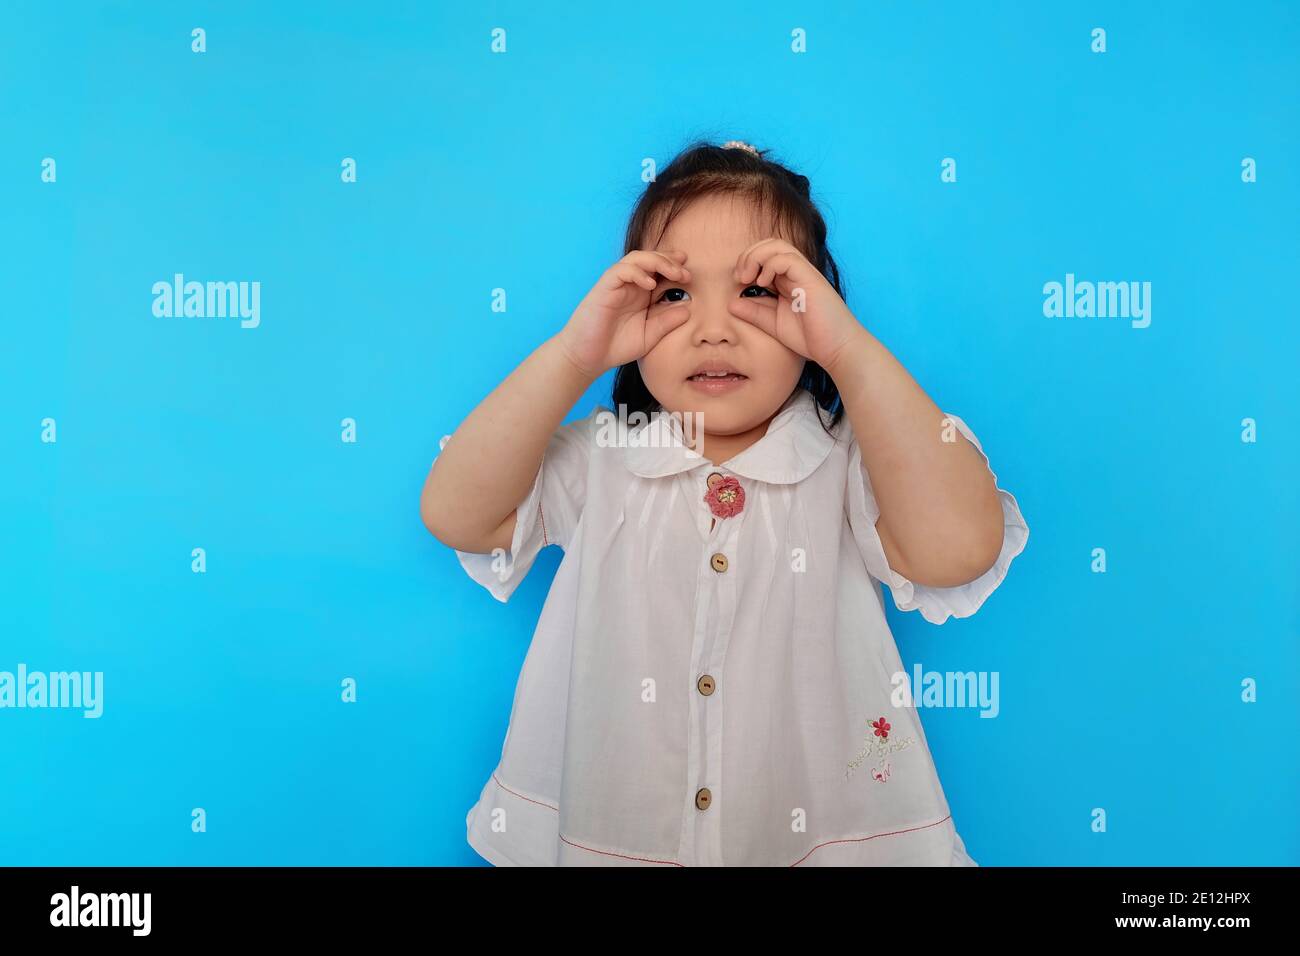 A cute young Asian girl is pretending to be a spy, using her hands as her pretend binoculars, playing and having fun. Plain light blue background. Stock Photo